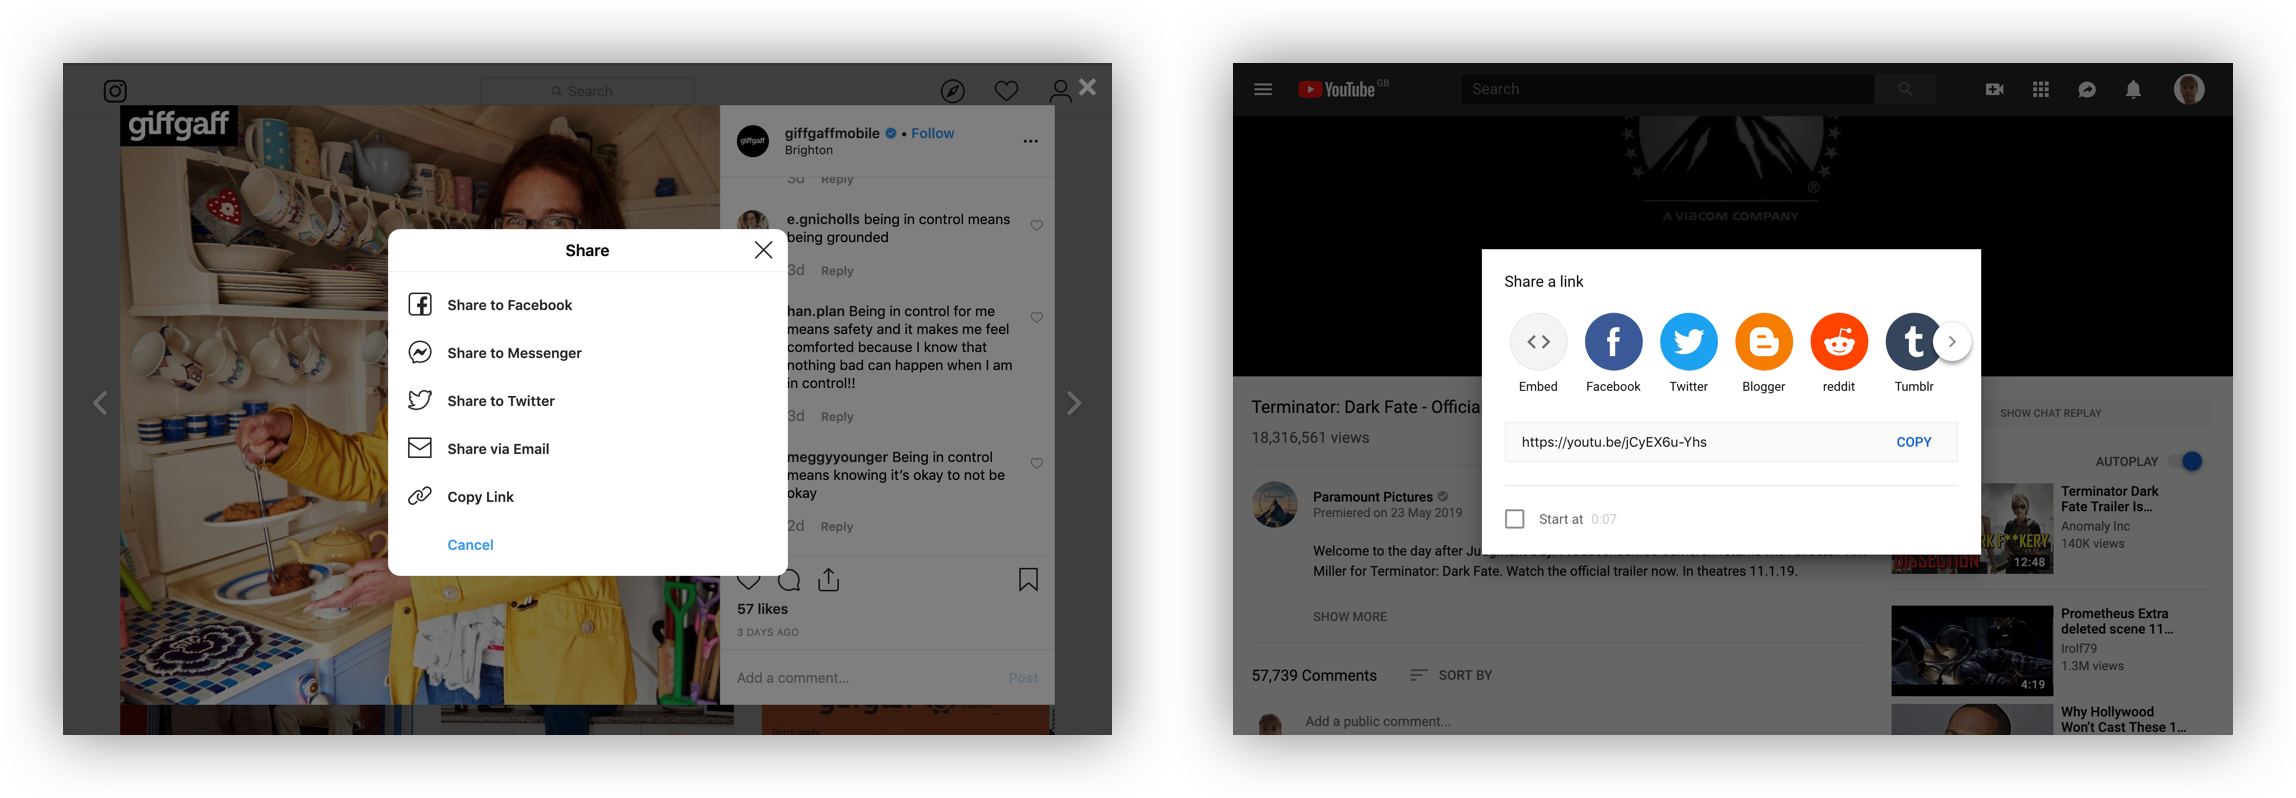 Comparing Instagram and YouTube share options on desktop.